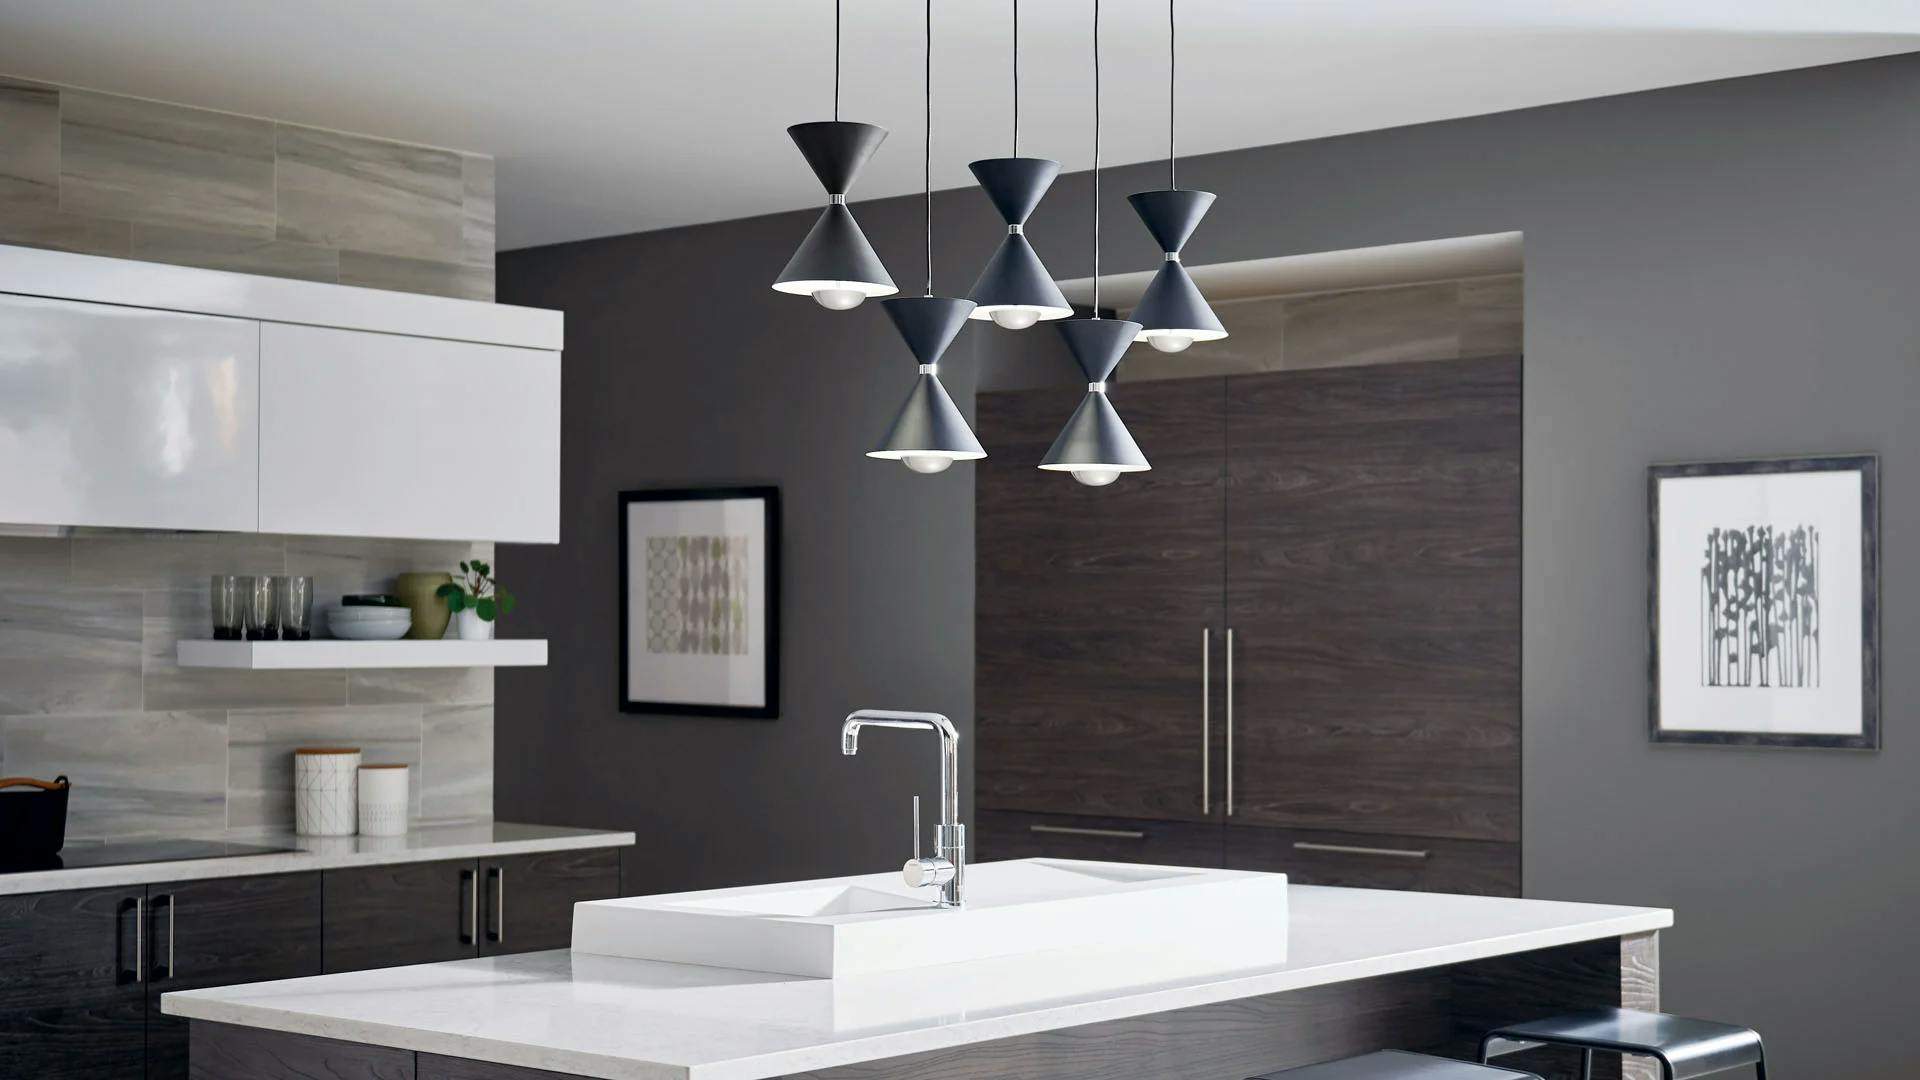 Modern kitchen during the day featuring a cluster of five kordan pendants in black over a kitchen island.